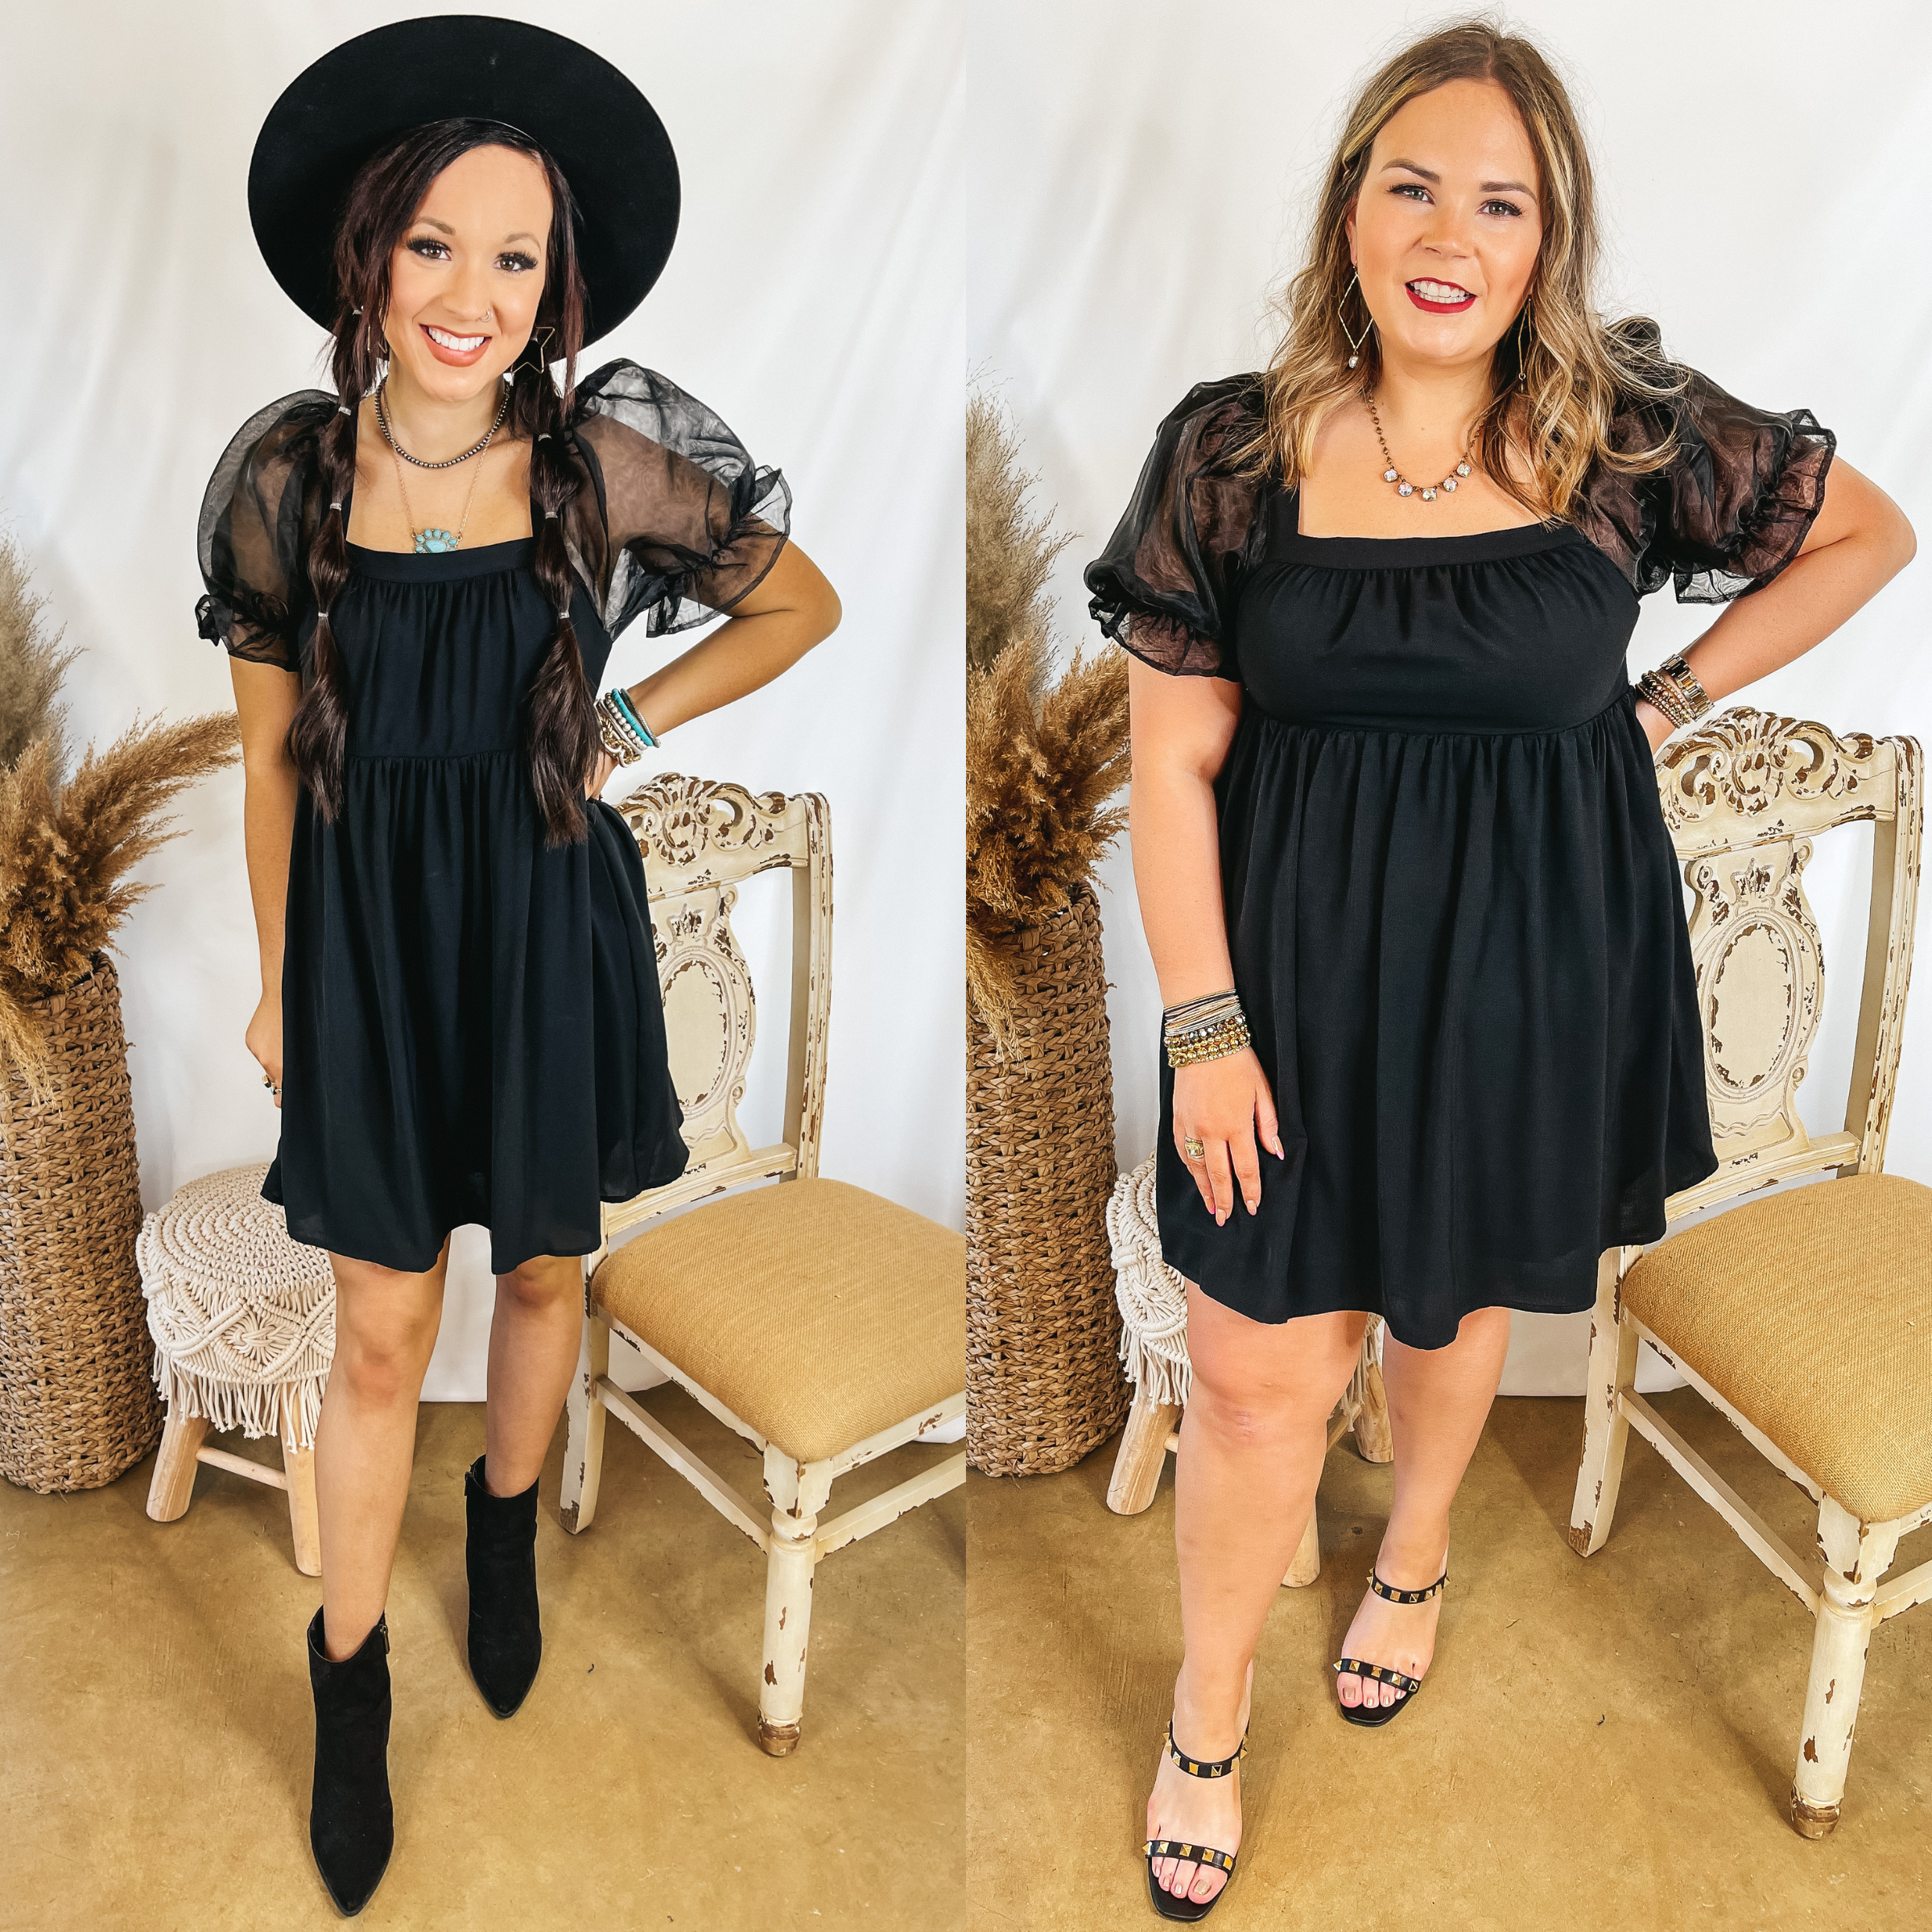 Models are wearing a black short dress with mesh puff short sleeves. Size small model has it paired with black booties and a black hat. Size large model has it paired with black heels and crystal jewelry.